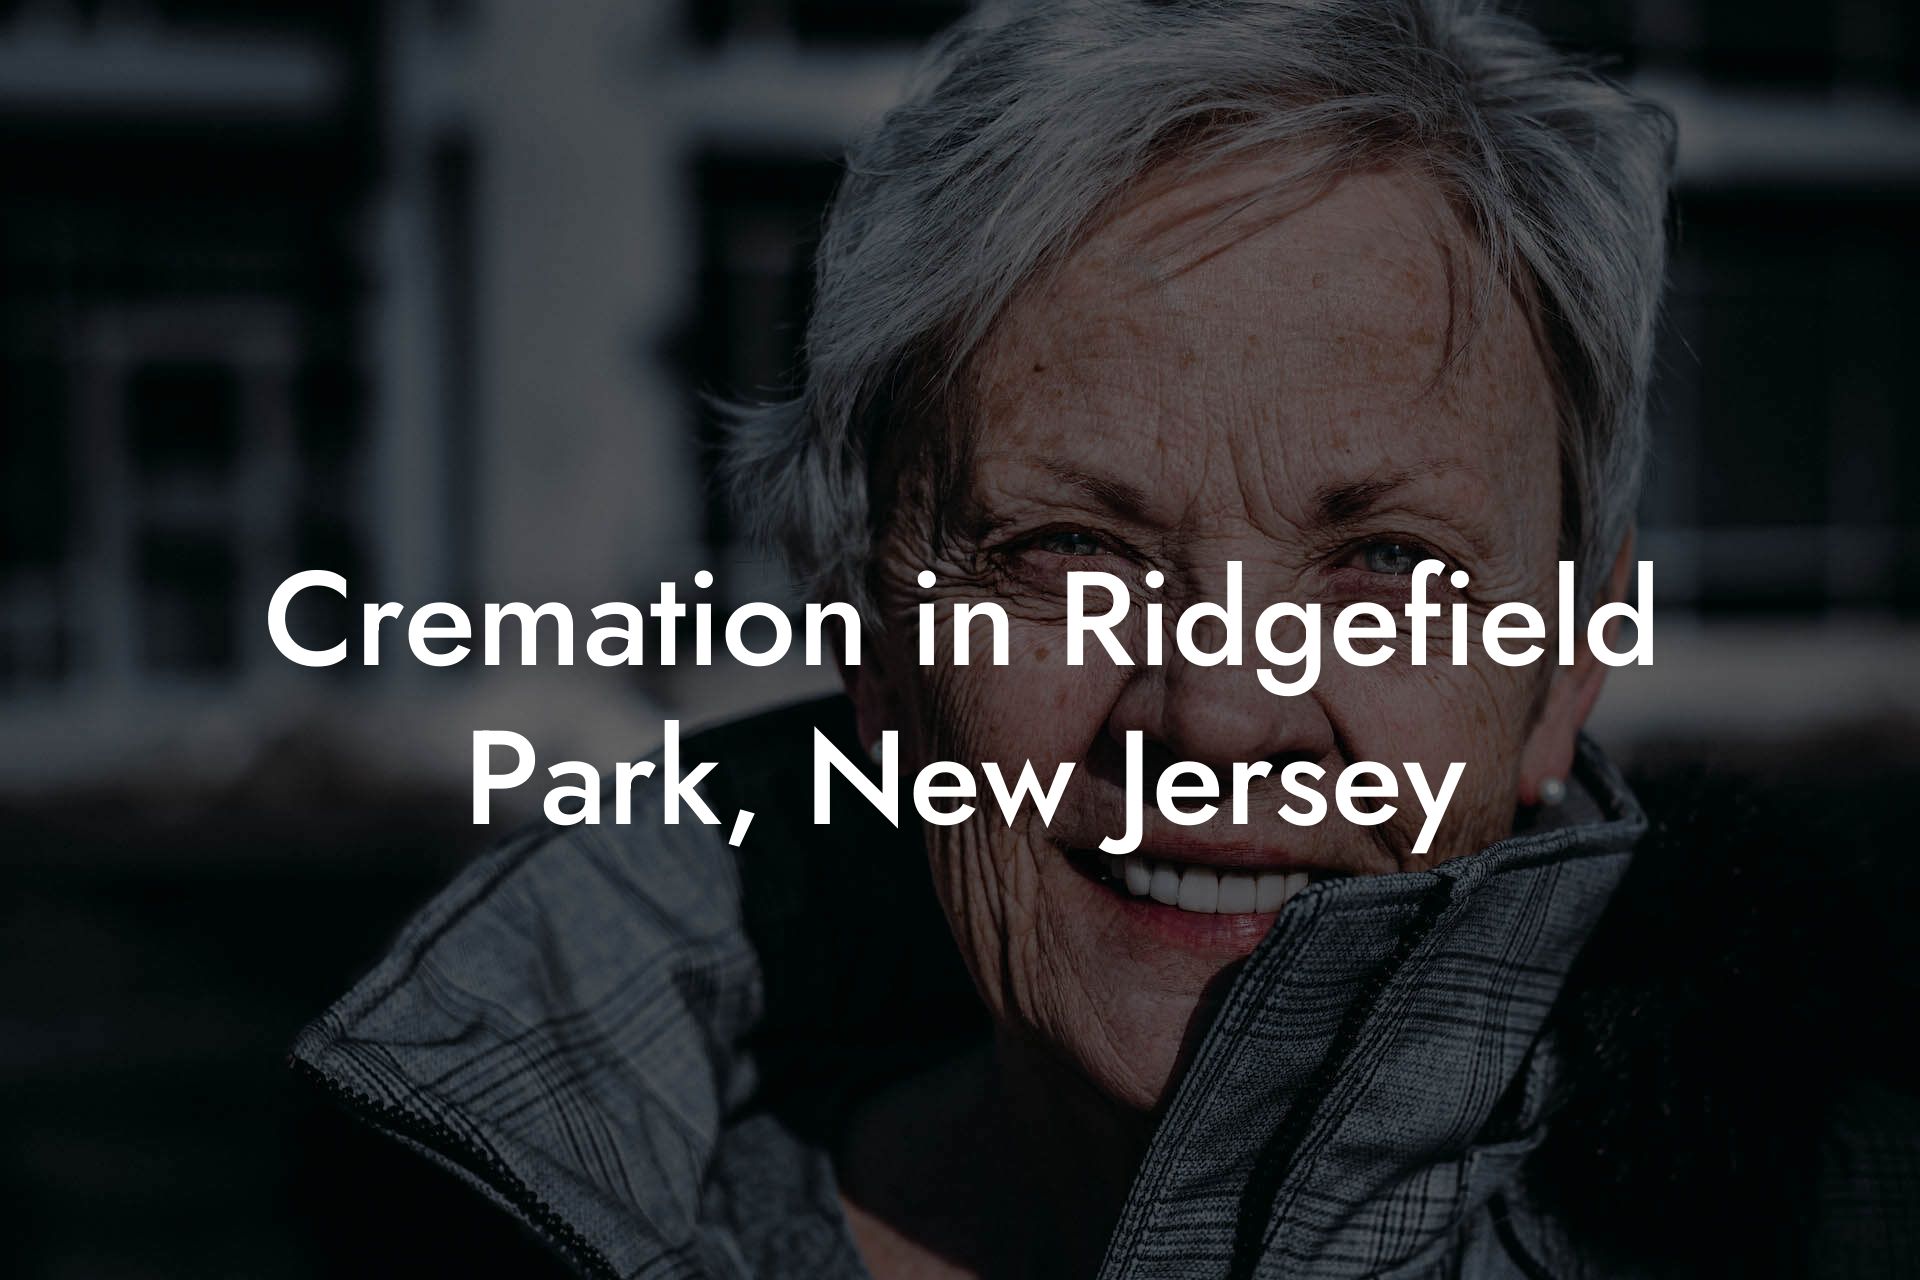 Cremation in Ridgefield Park, New Jersey